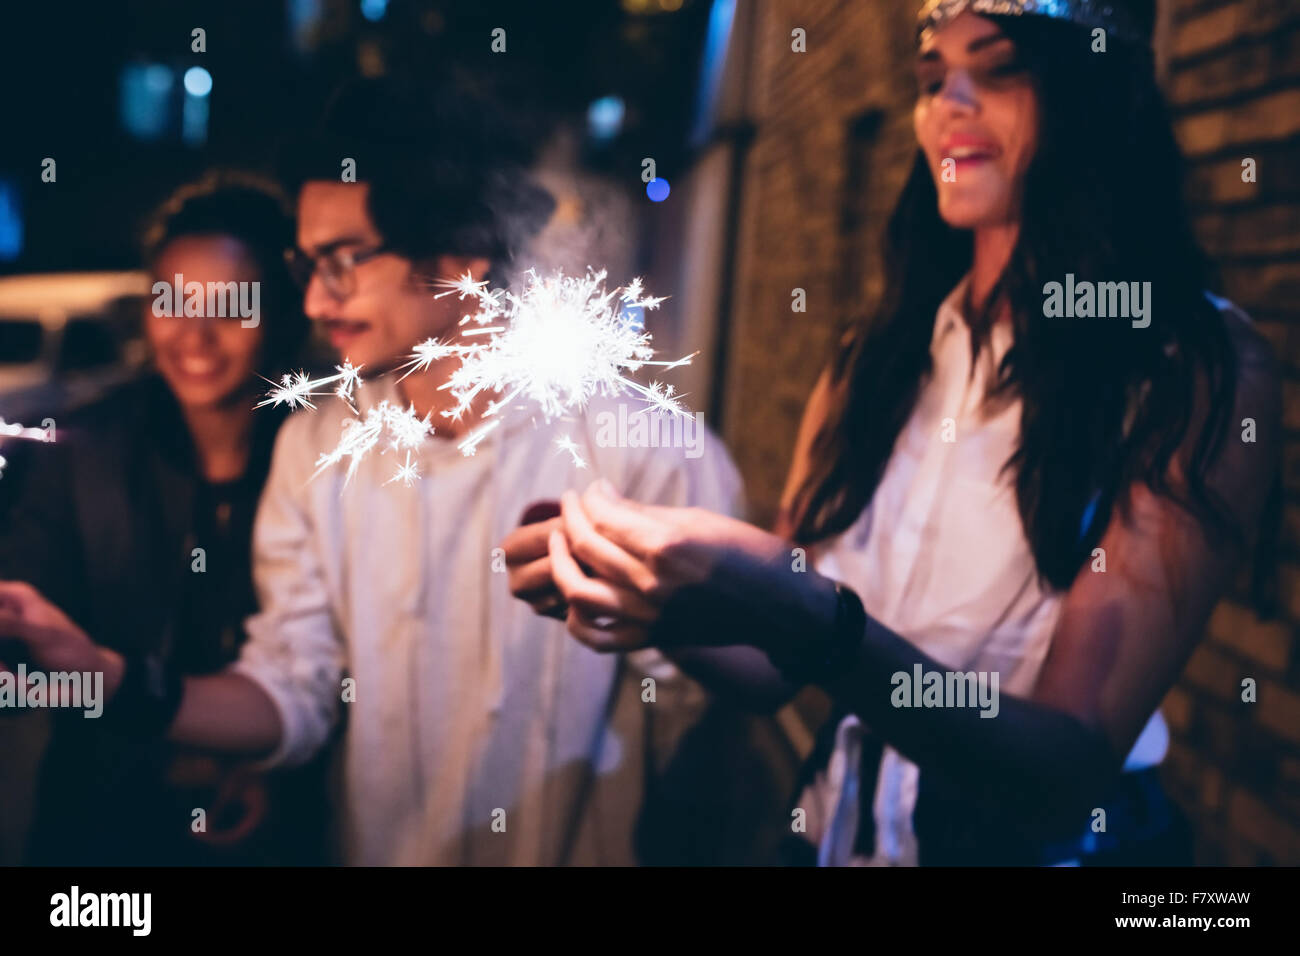 Young friends out at night, celebrating with sparklers. Men and women hanging out at night having a party. Stock Photo